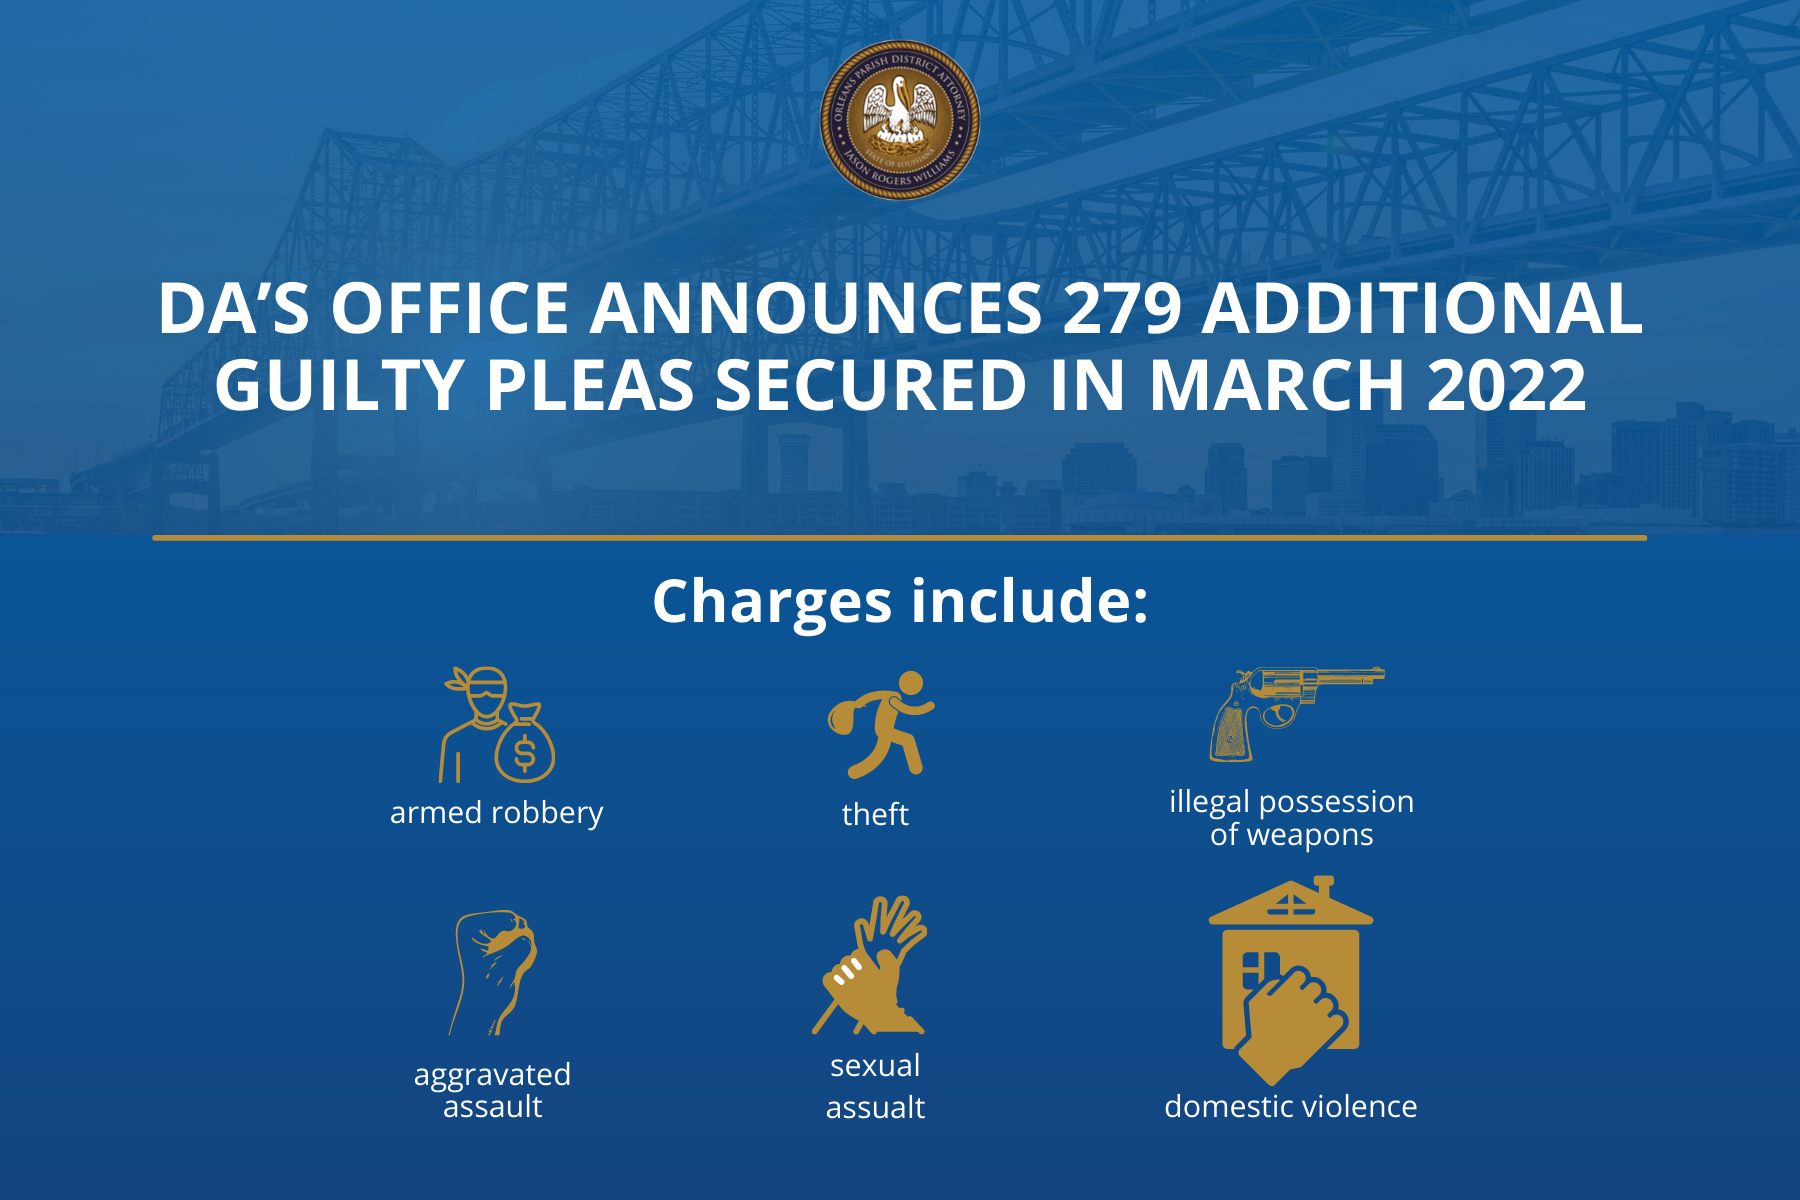 DA’s Office Announces 279 Additional Guilty Pleas Secured In March 2022